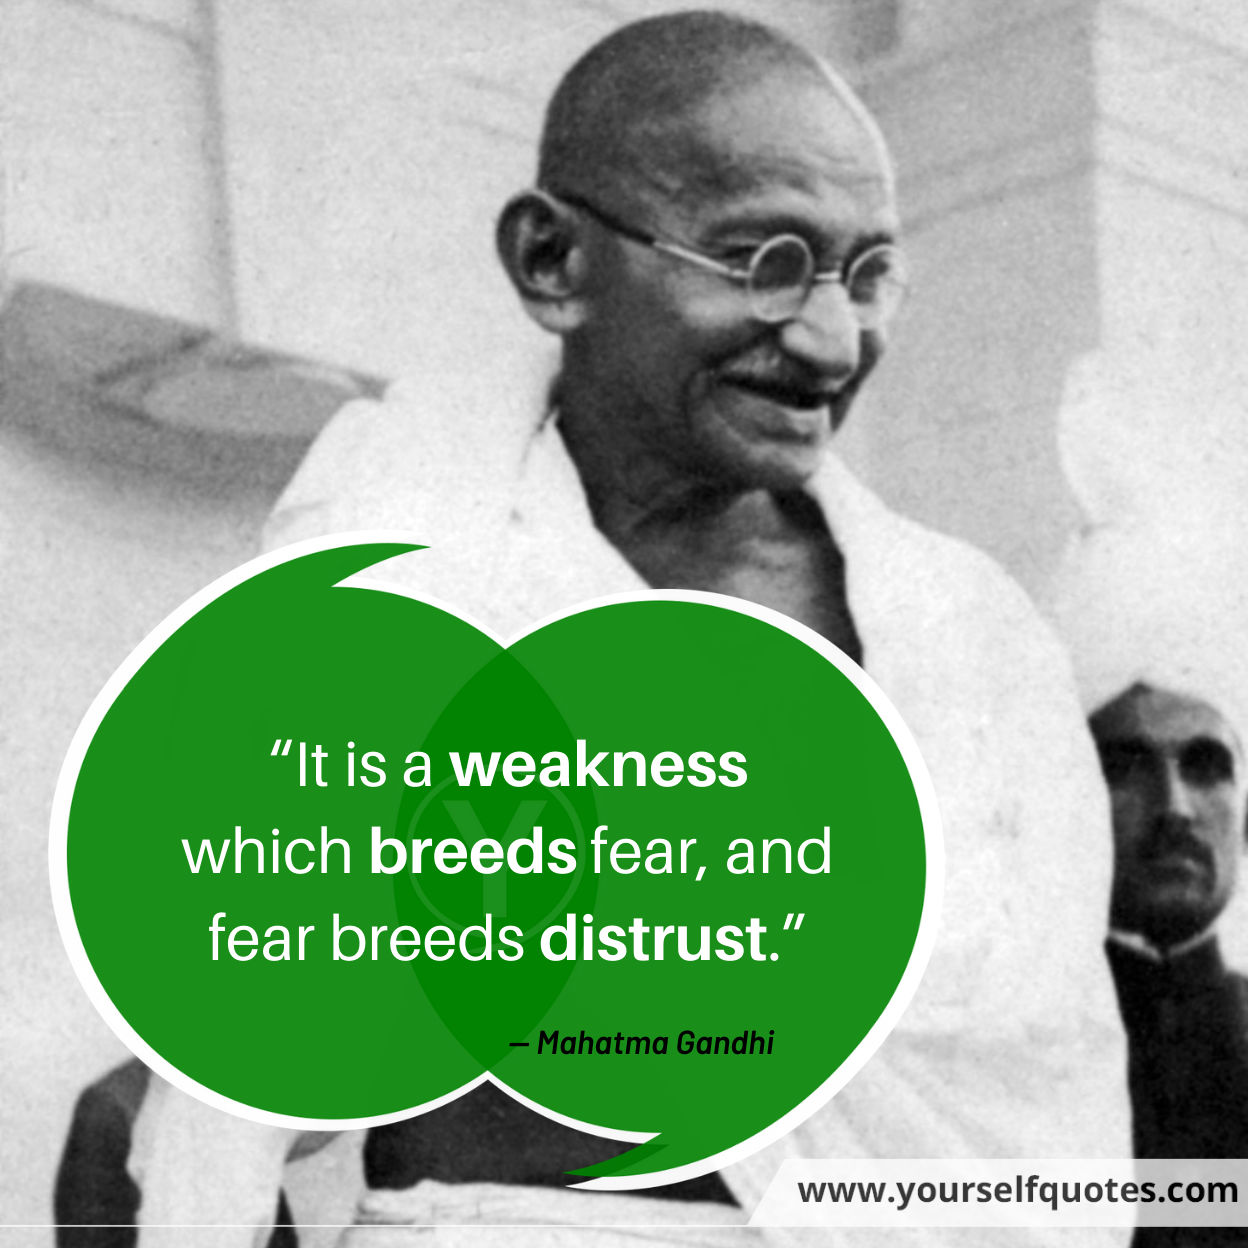 Quotes By Mahatma Gandhi On Education